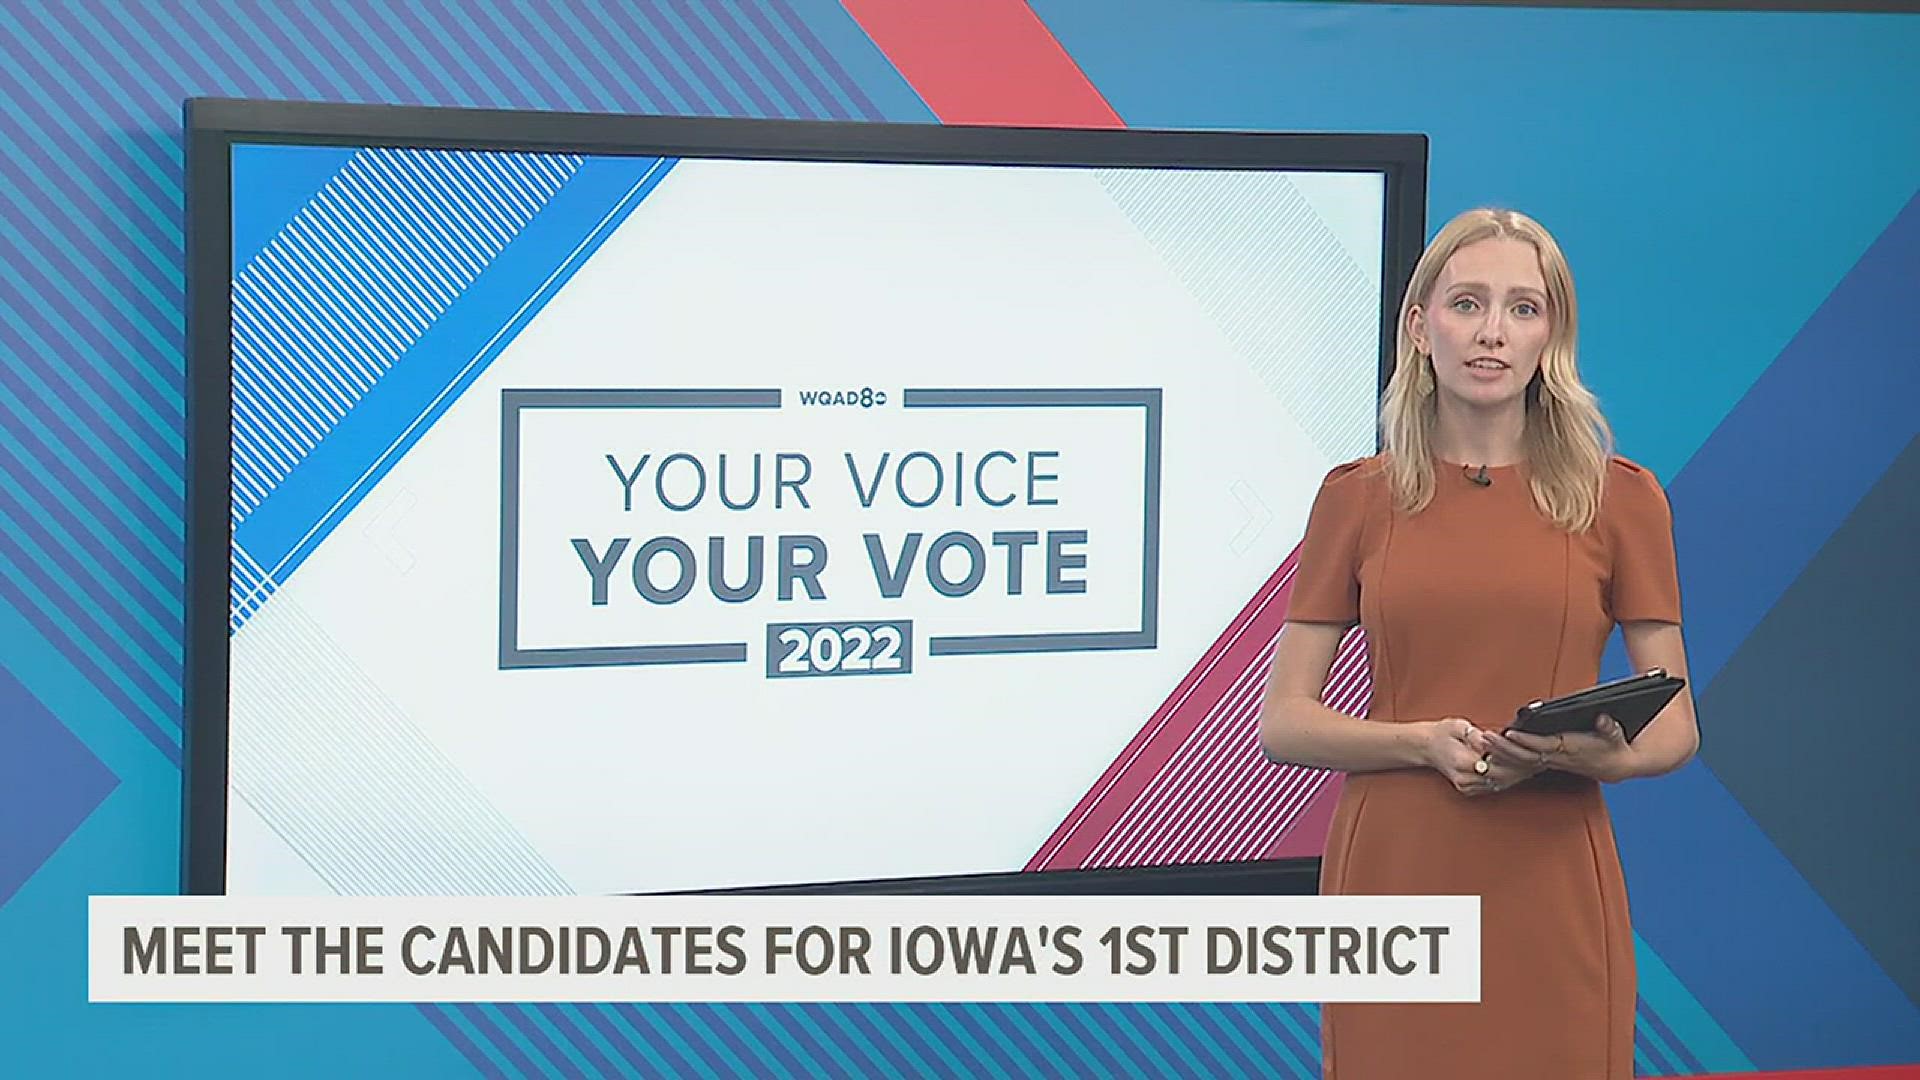 News 8 sat down with incumbent Mariannette Miller-Meeks (R) and her challenger Christina Bohannan (D) to hear each 1st district candidate's policies and points.